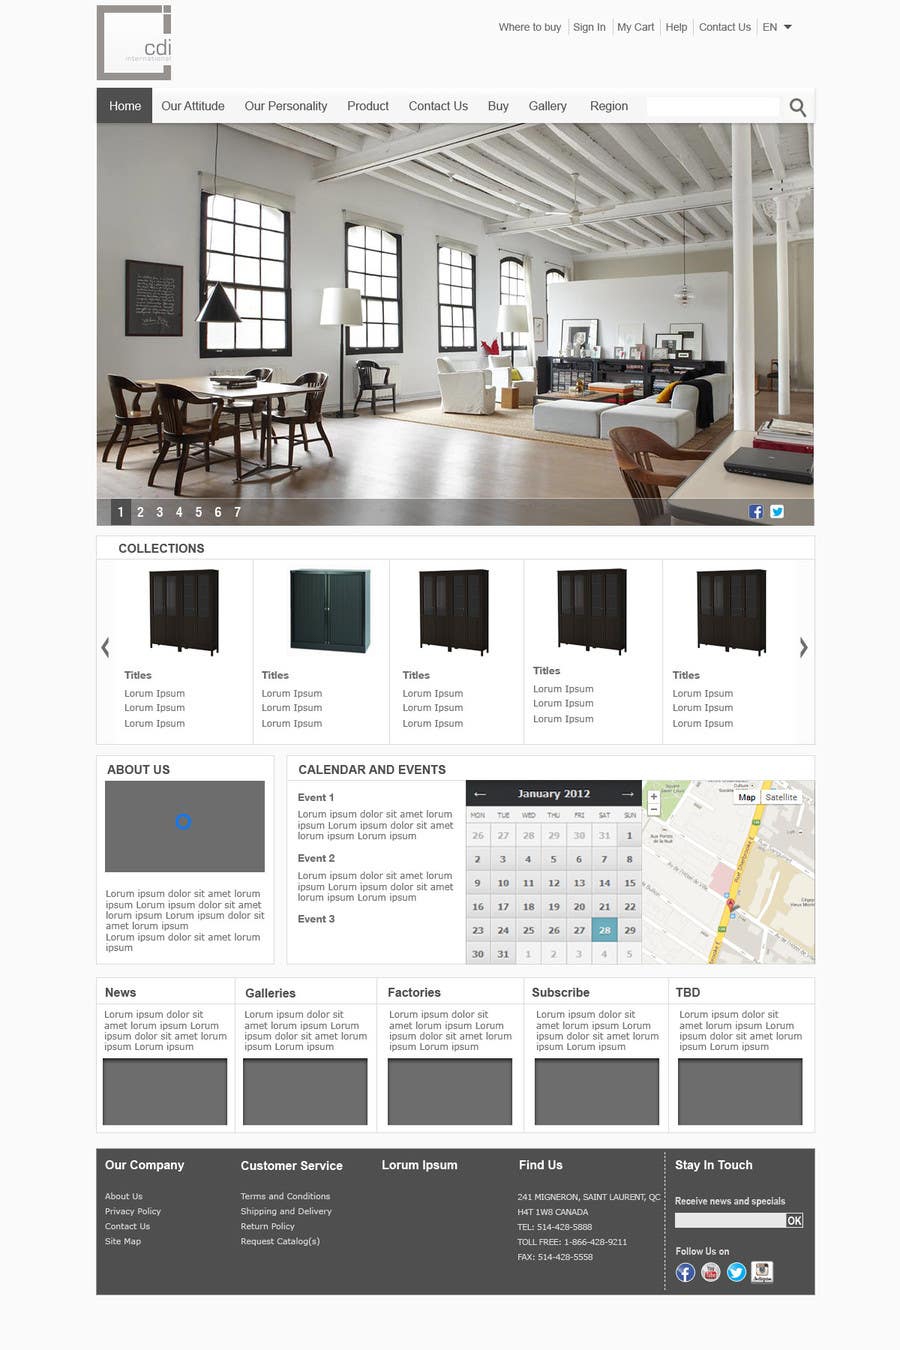 Bài tham dự cuộc thi #7 cho                                                 Design a Website Mockup for our company HOME PAGE ONLY
                                            